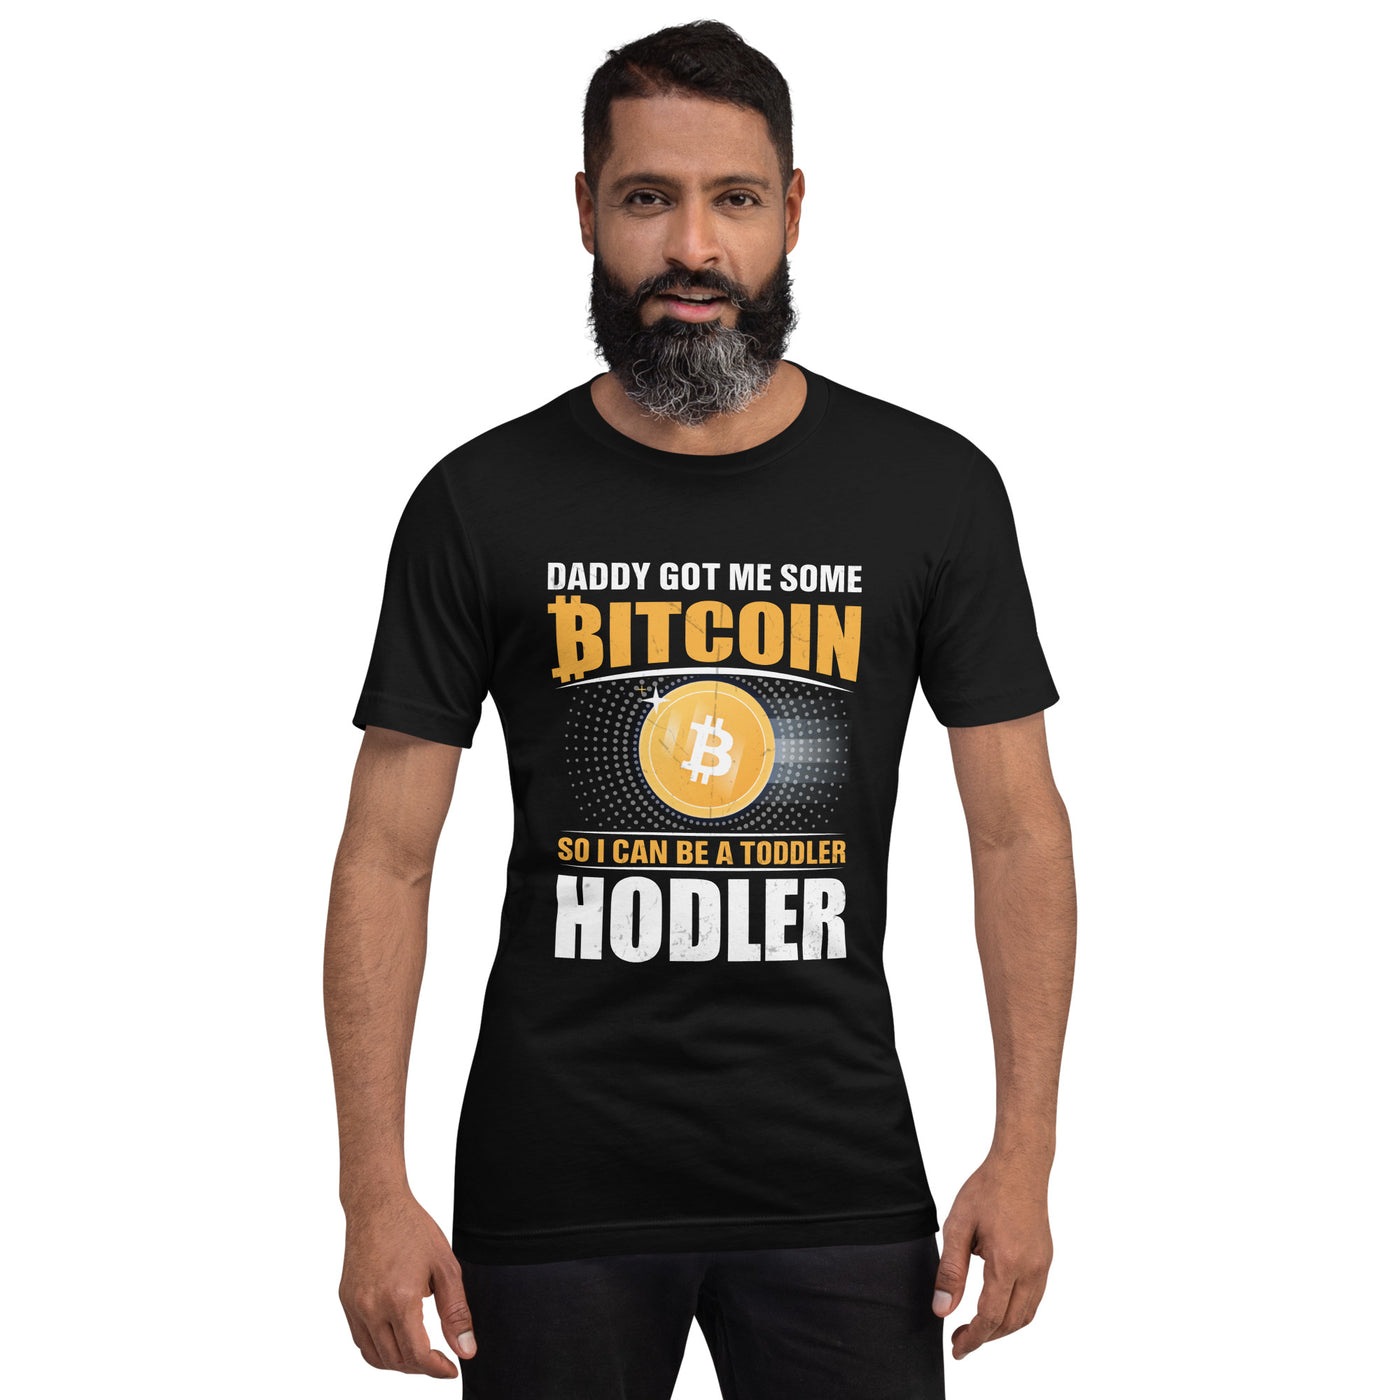 Daddy got me some Bitcoin, so I can be toddler holder - Unisex t-shirt